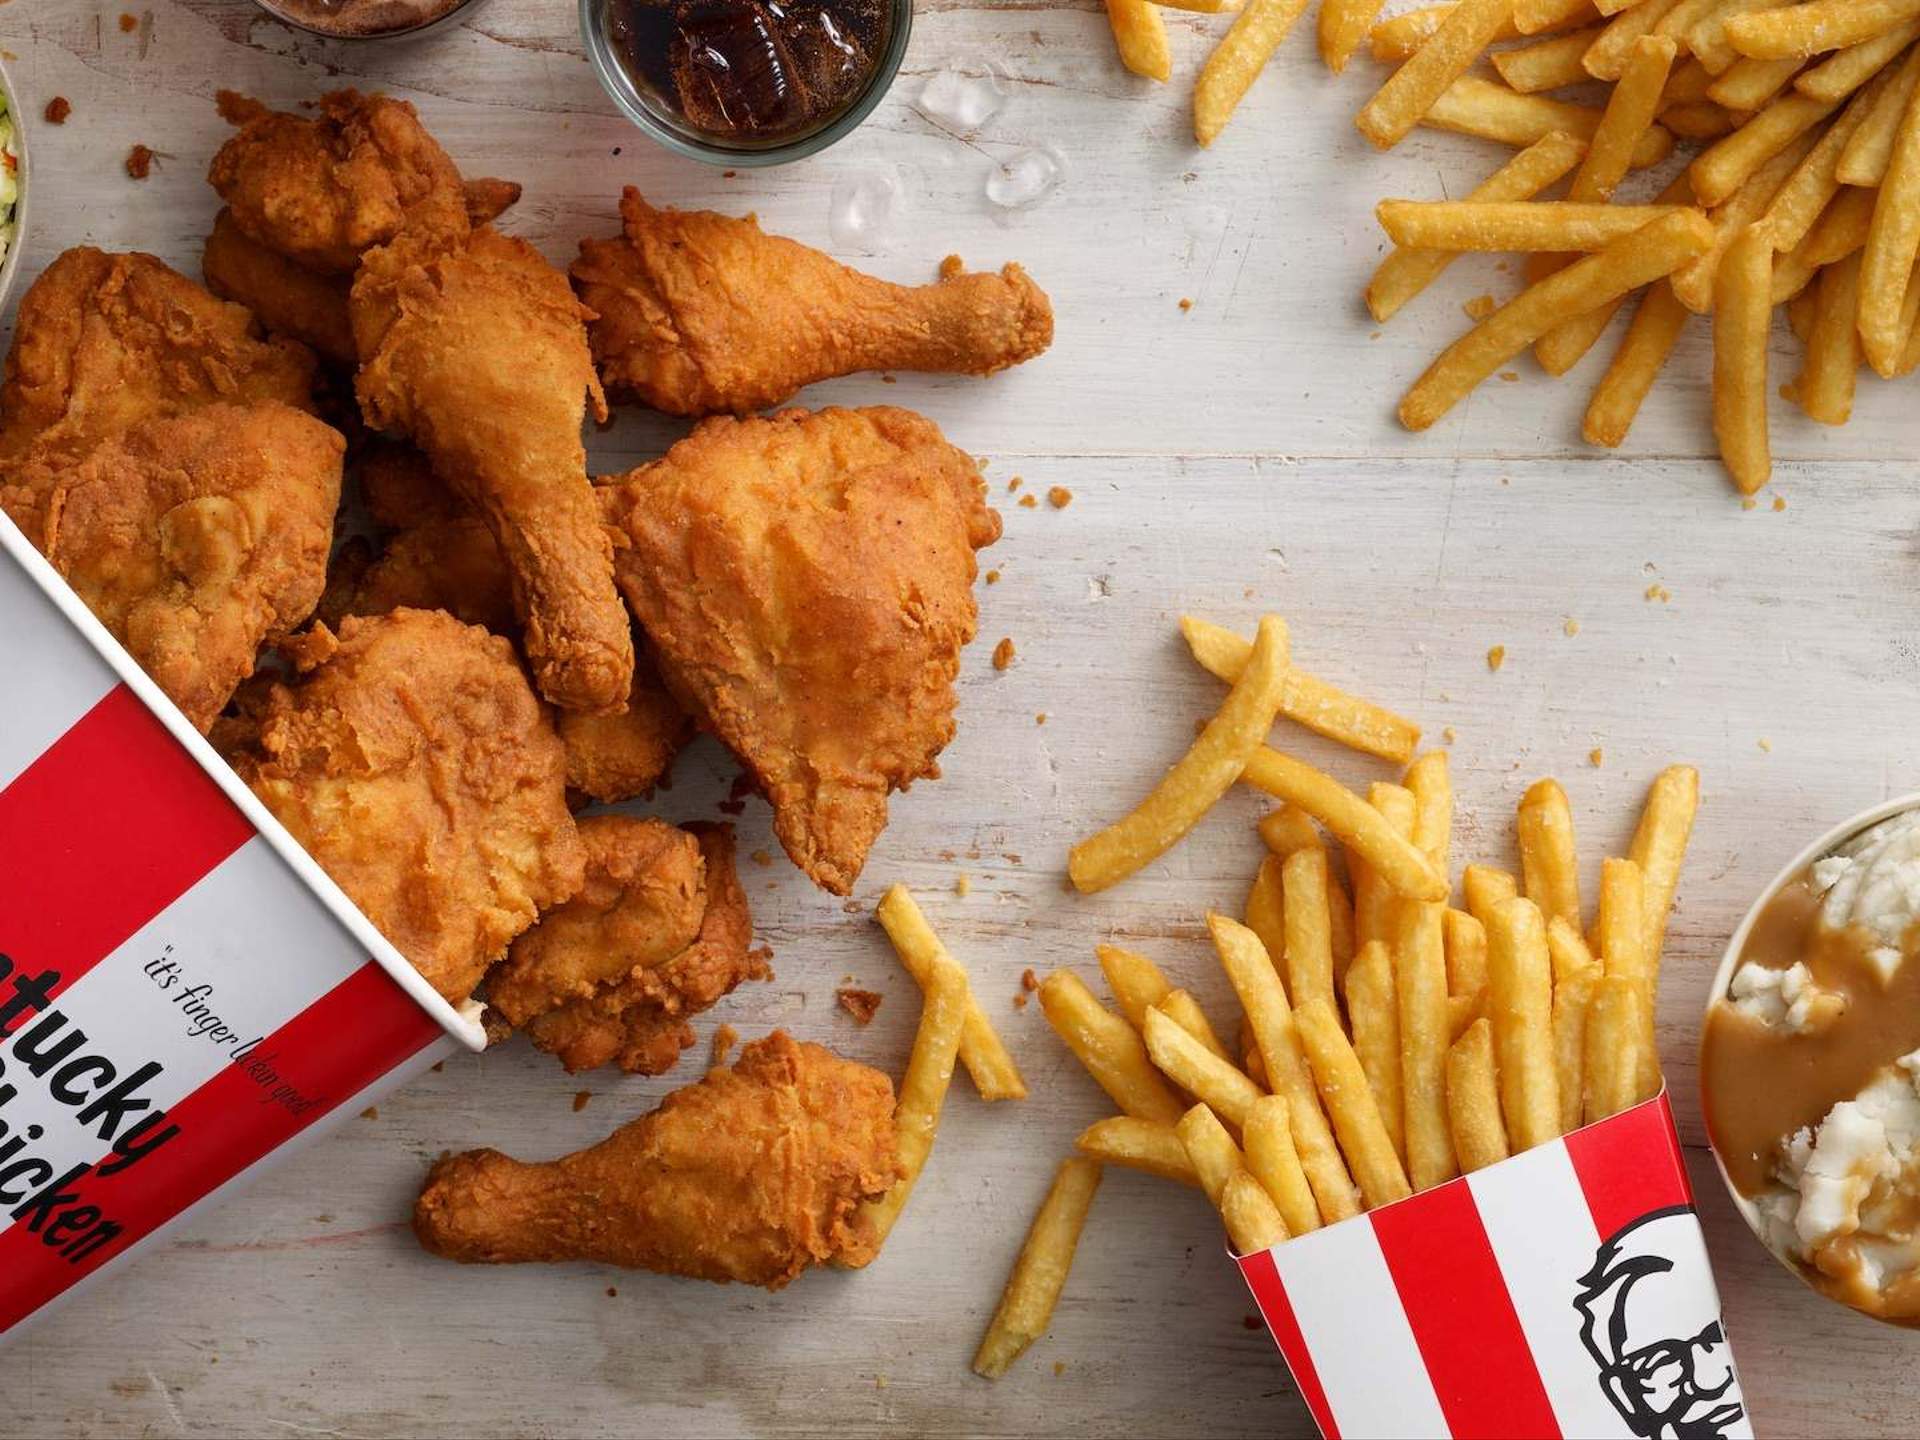 Kfc Is Offering Delivery On Its Fried Chicken For The First